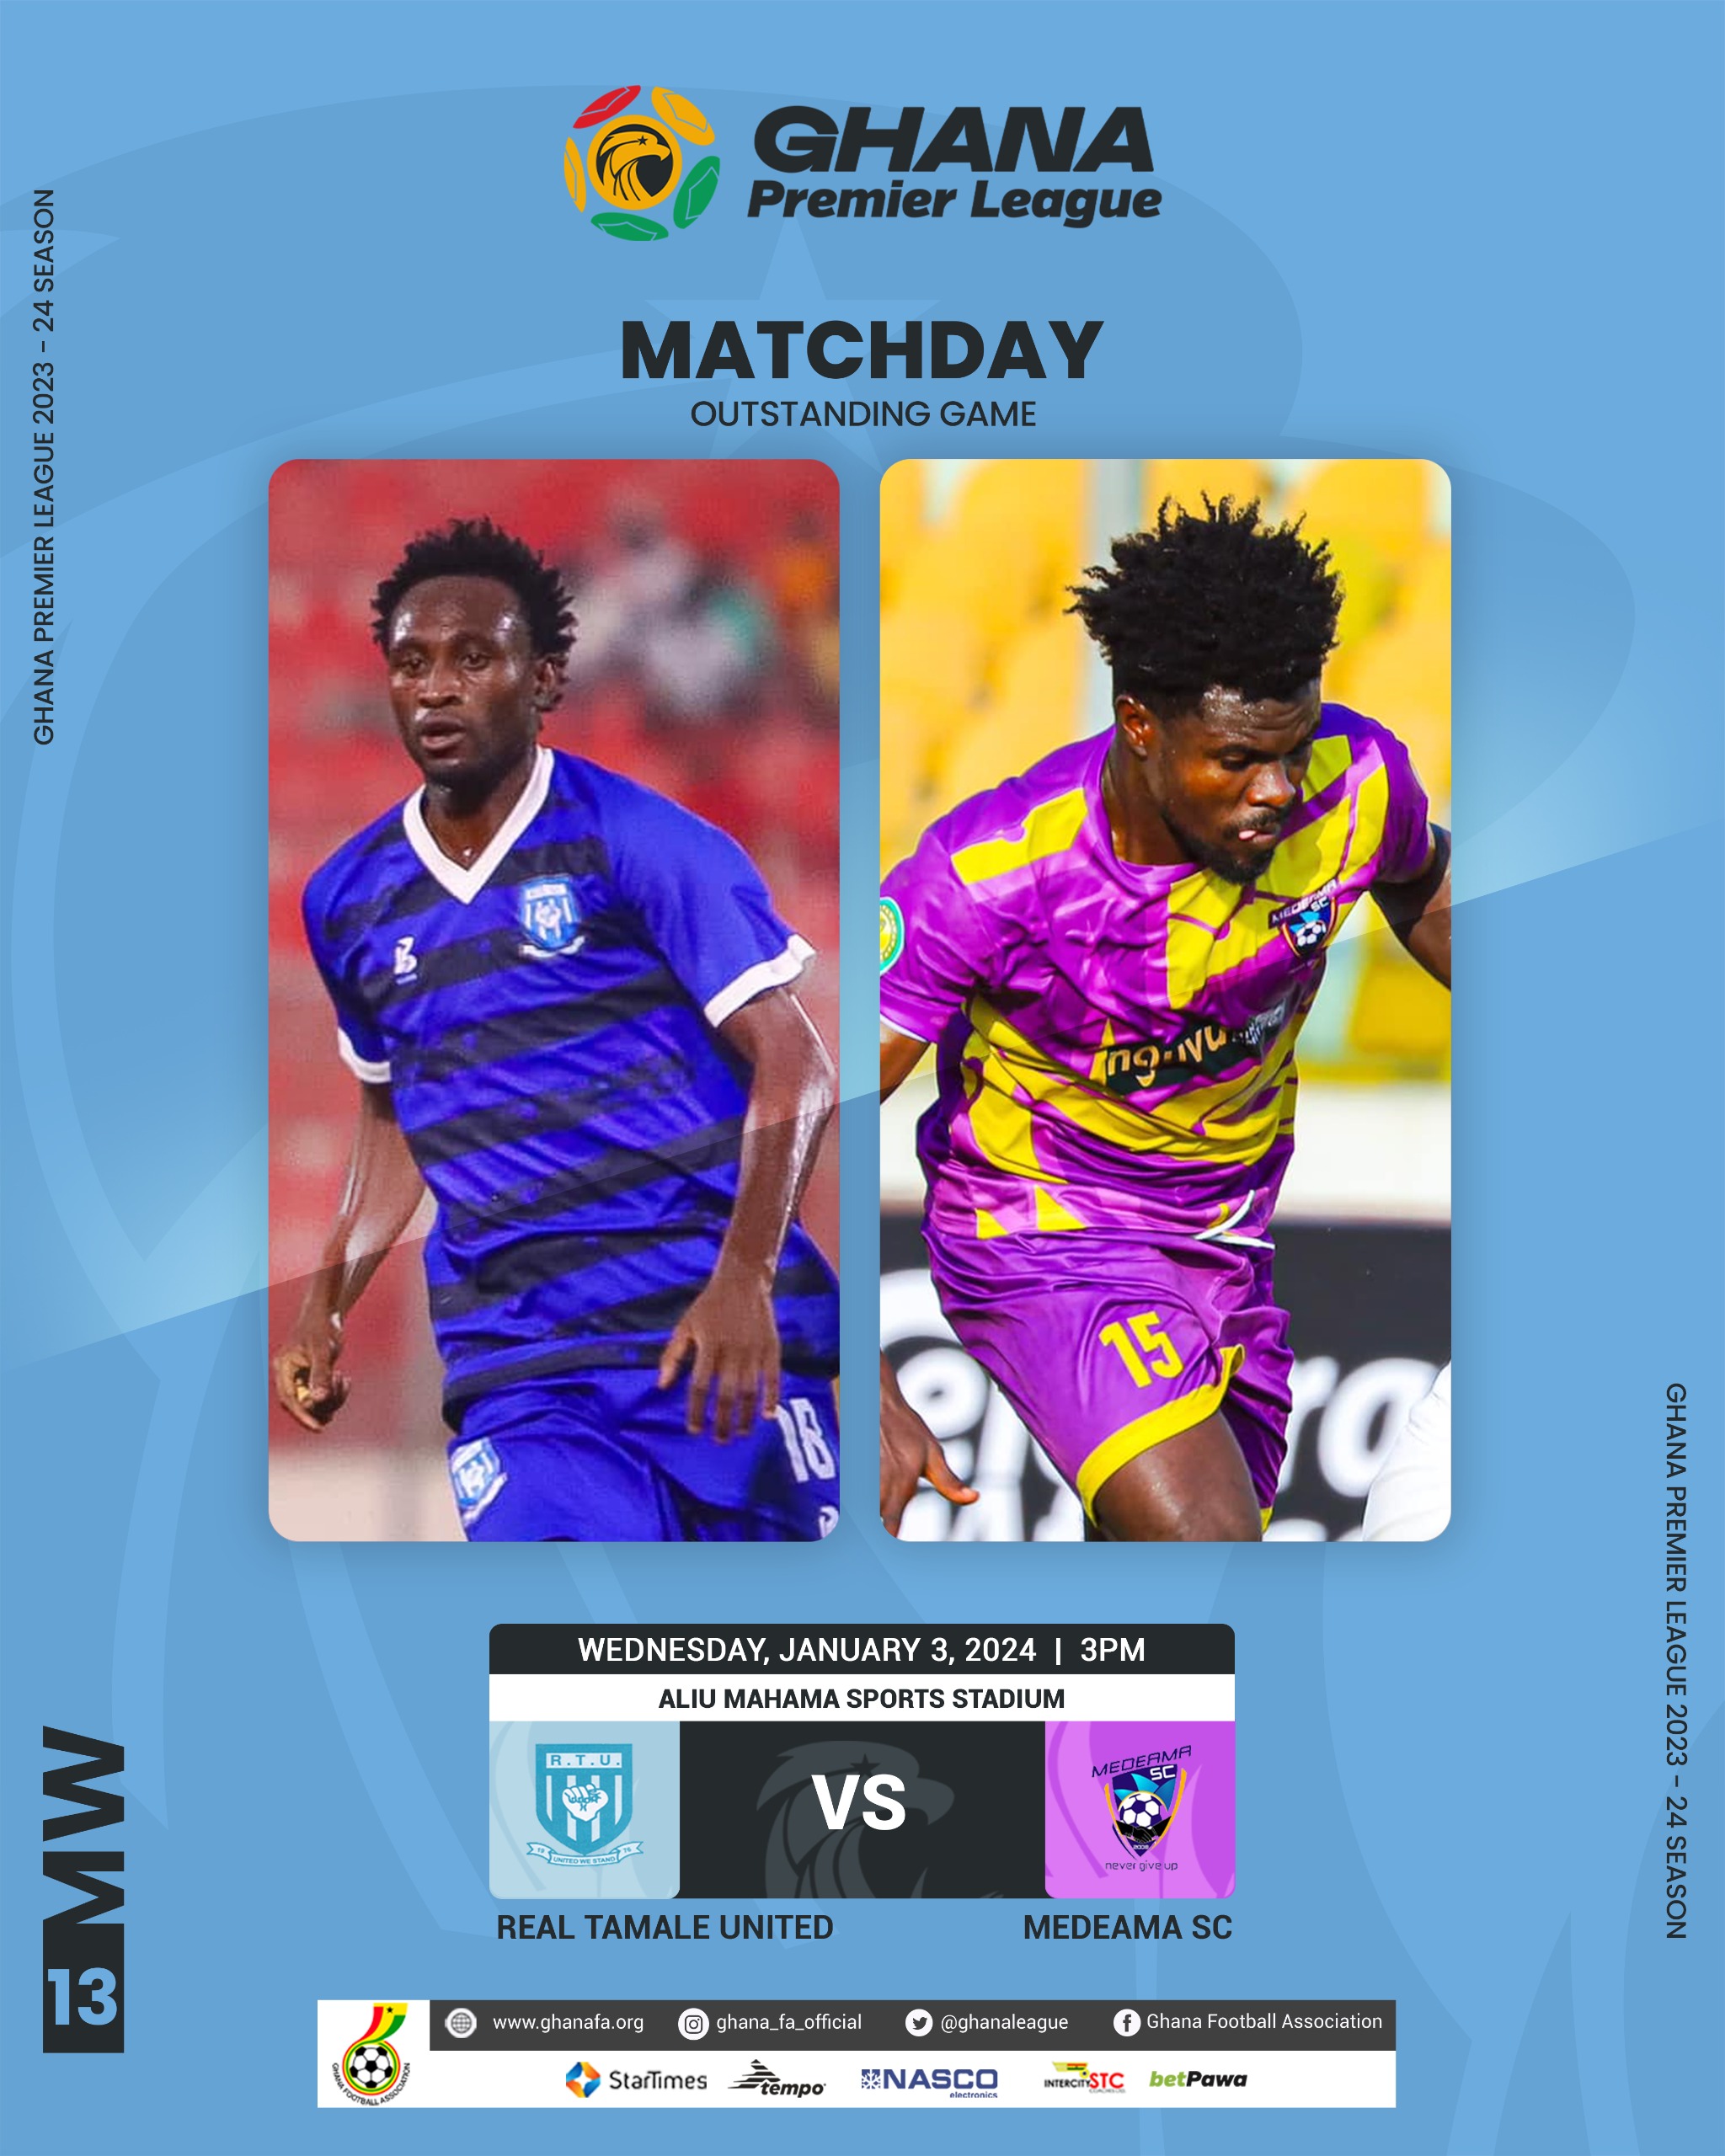 Medeama SC play Real Tamale United outstanding game on January 3